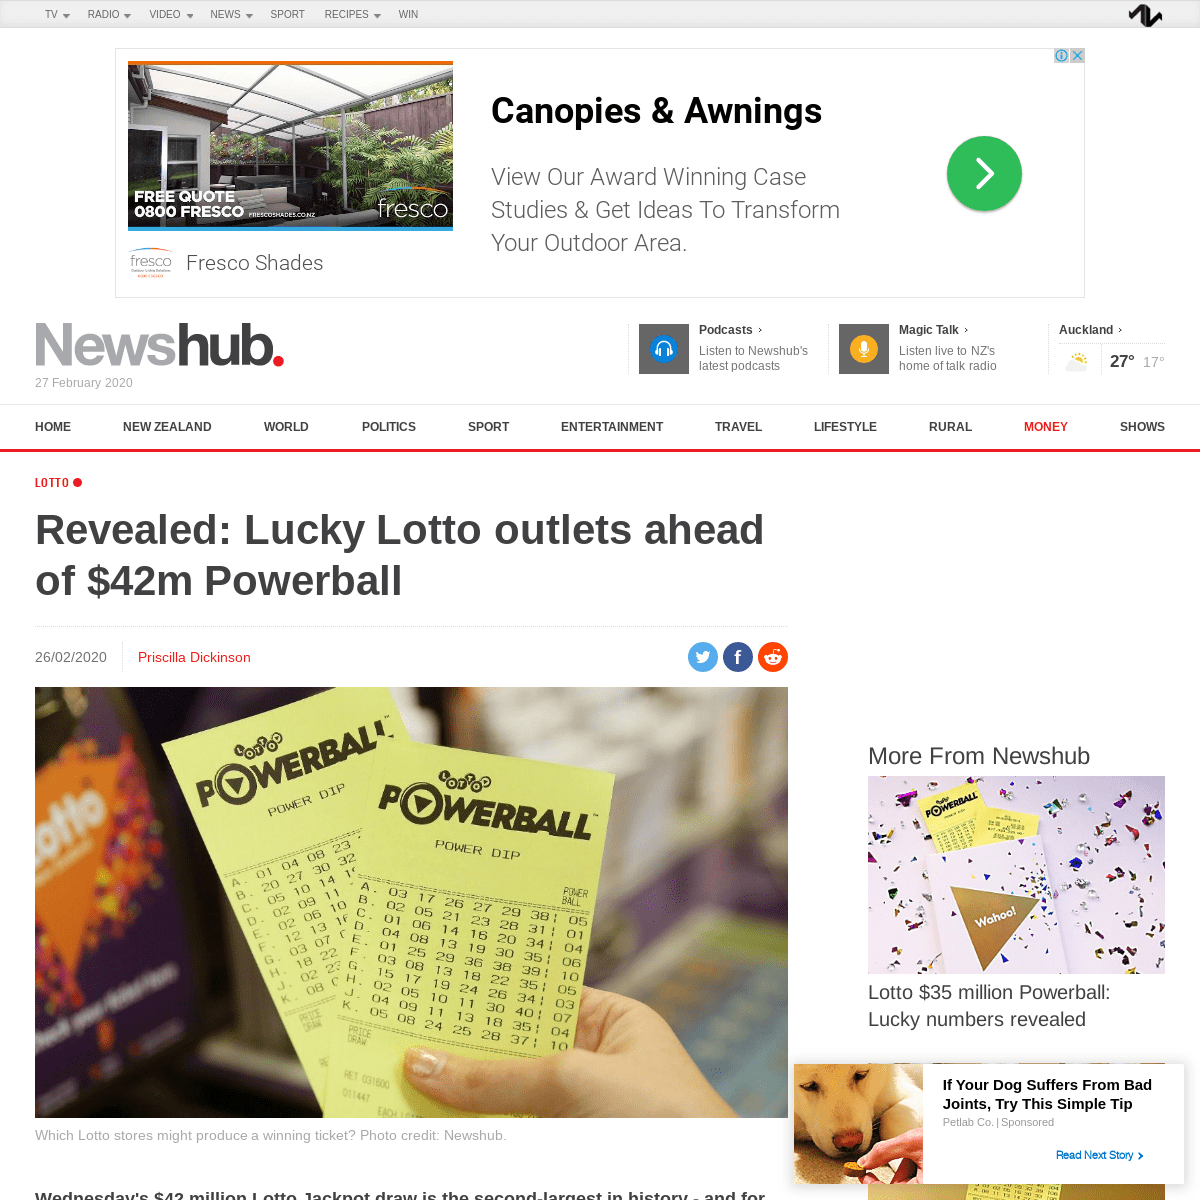 A complete backup of www.newshub.co.nz/home/money/2020/02/revealed-lucky-lotto-outlets-ahead-of-wednesday-s-42m-powerball.html